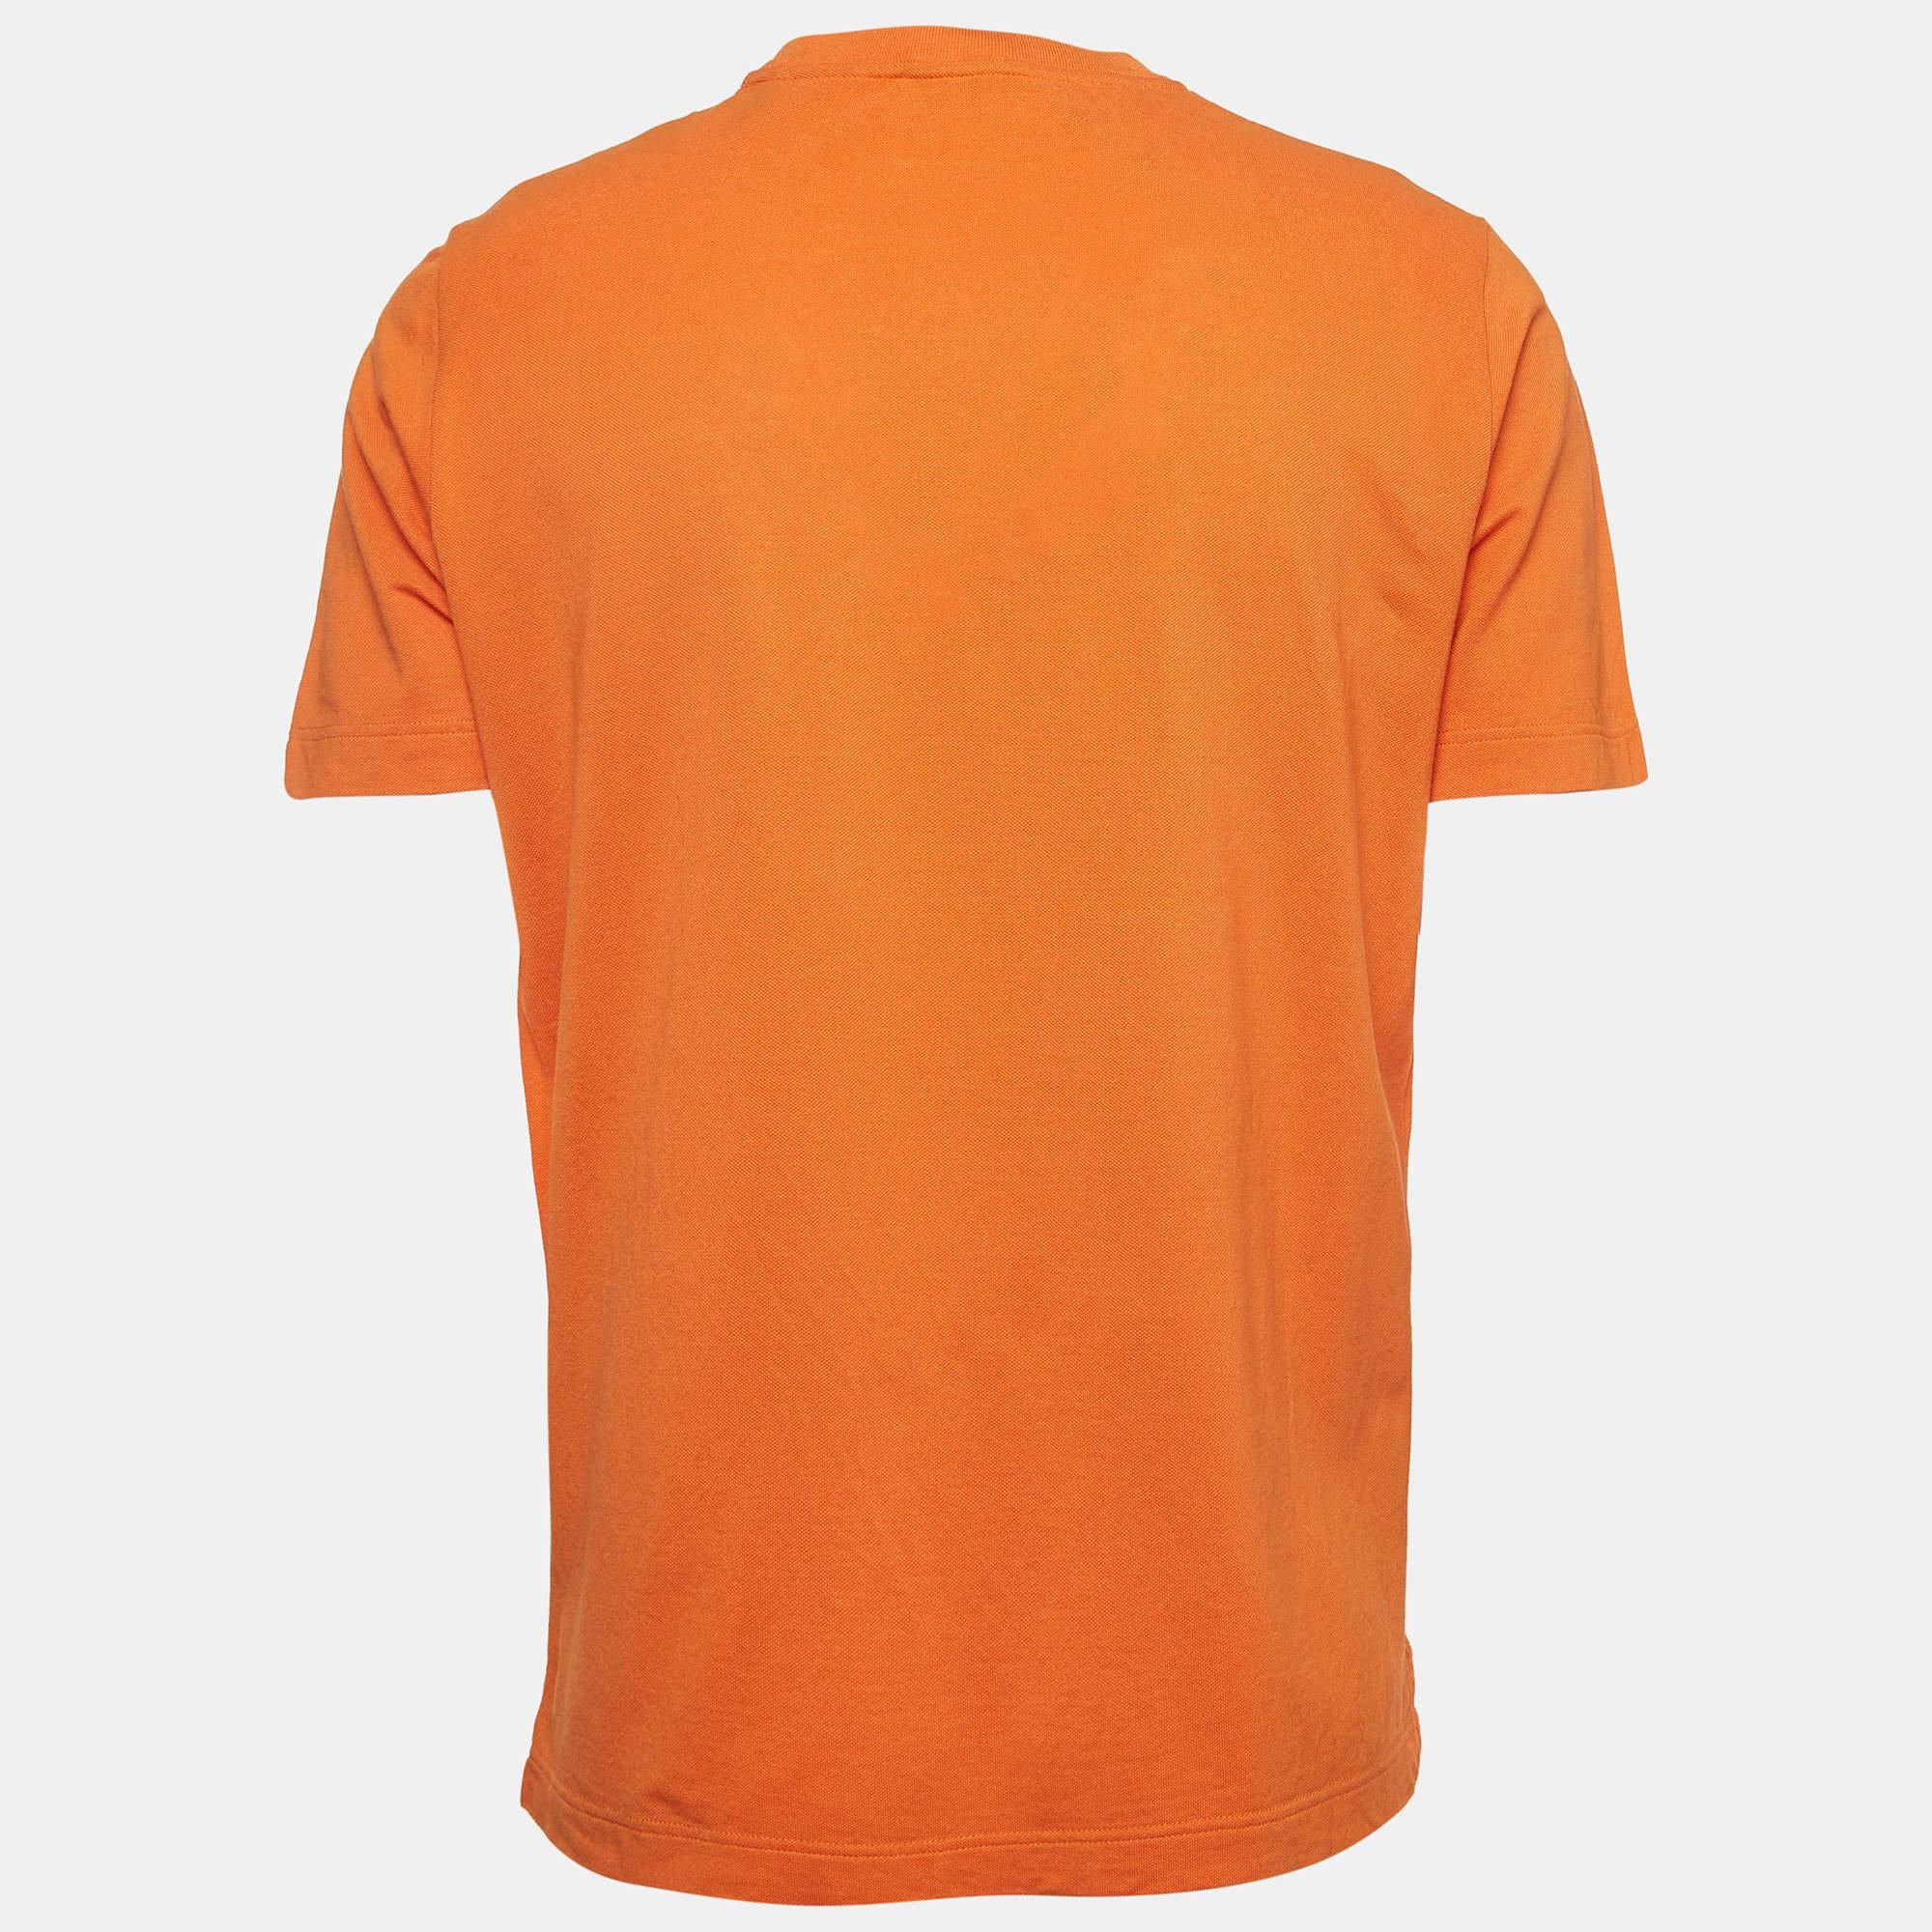 Elevate your everyday style with this meticulously crafted T-shirt by Hermes. Impeccable tailoring ensures a perfect fit, while the breathable fabric offers unparalleled ease. The creation fuses fashion and comfort seamlessly.

